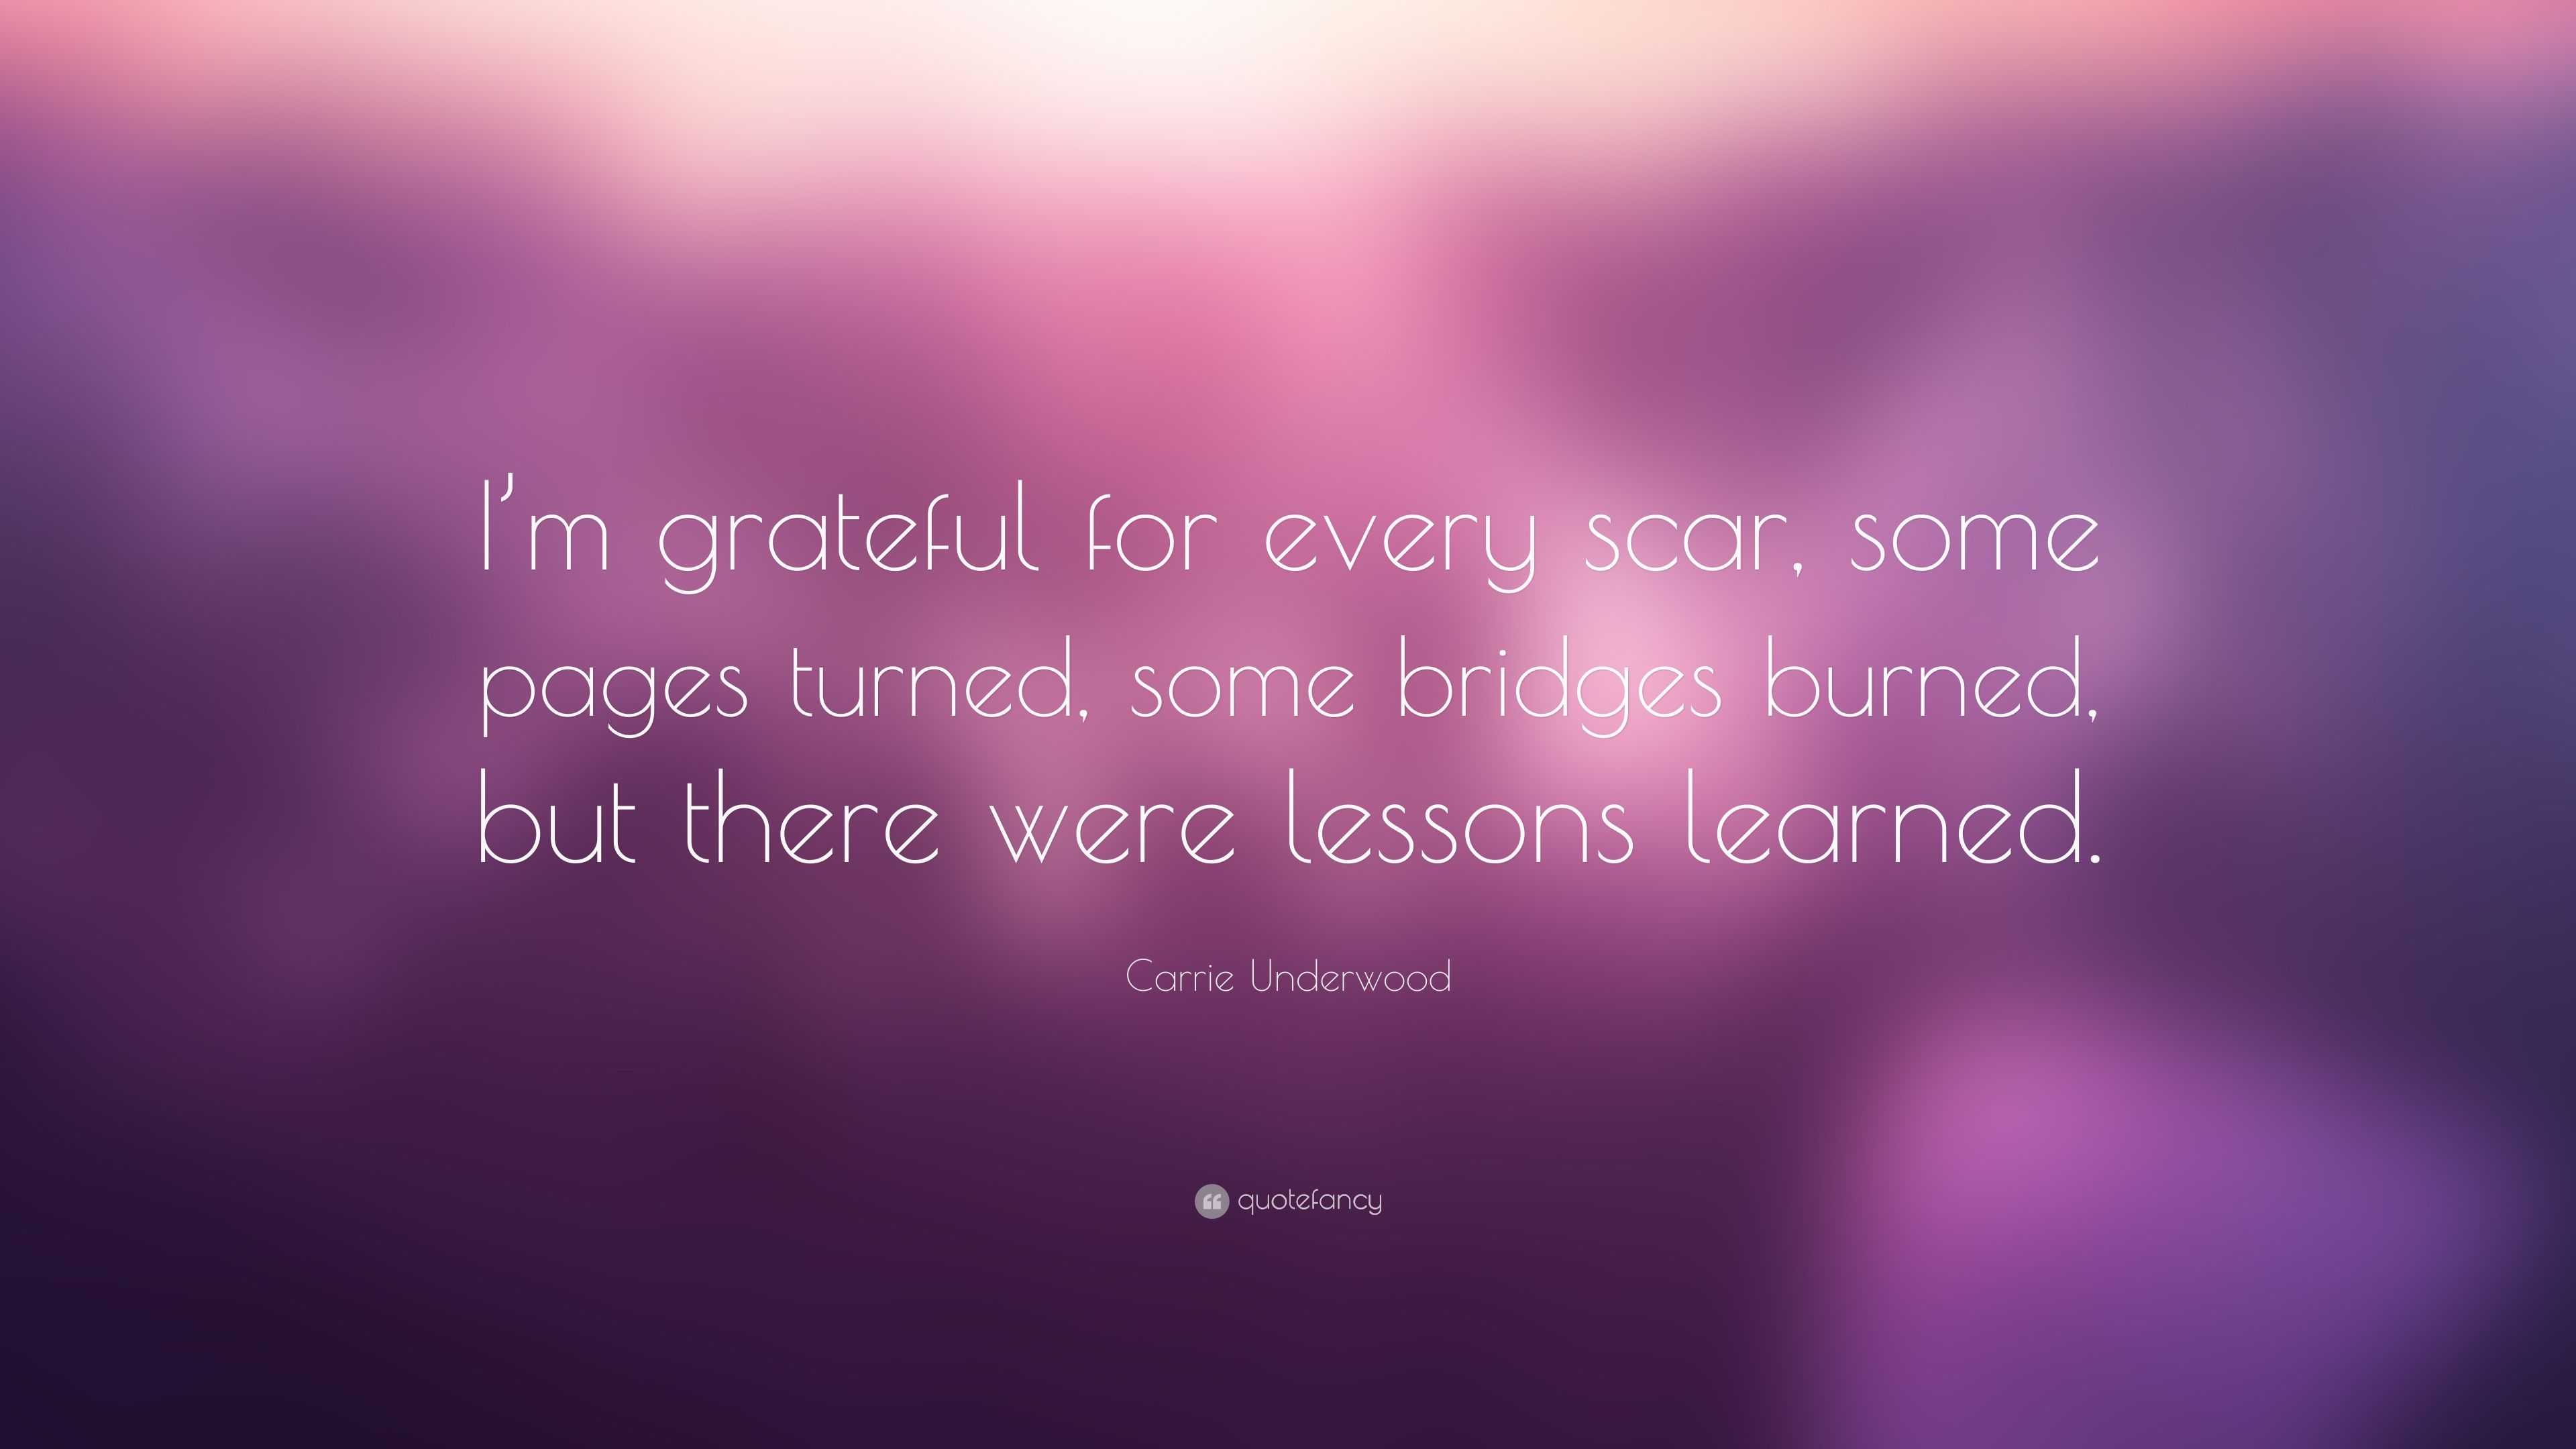 Carrie Underwood Quote: “I’m grateful for every scar, some pages turned ...